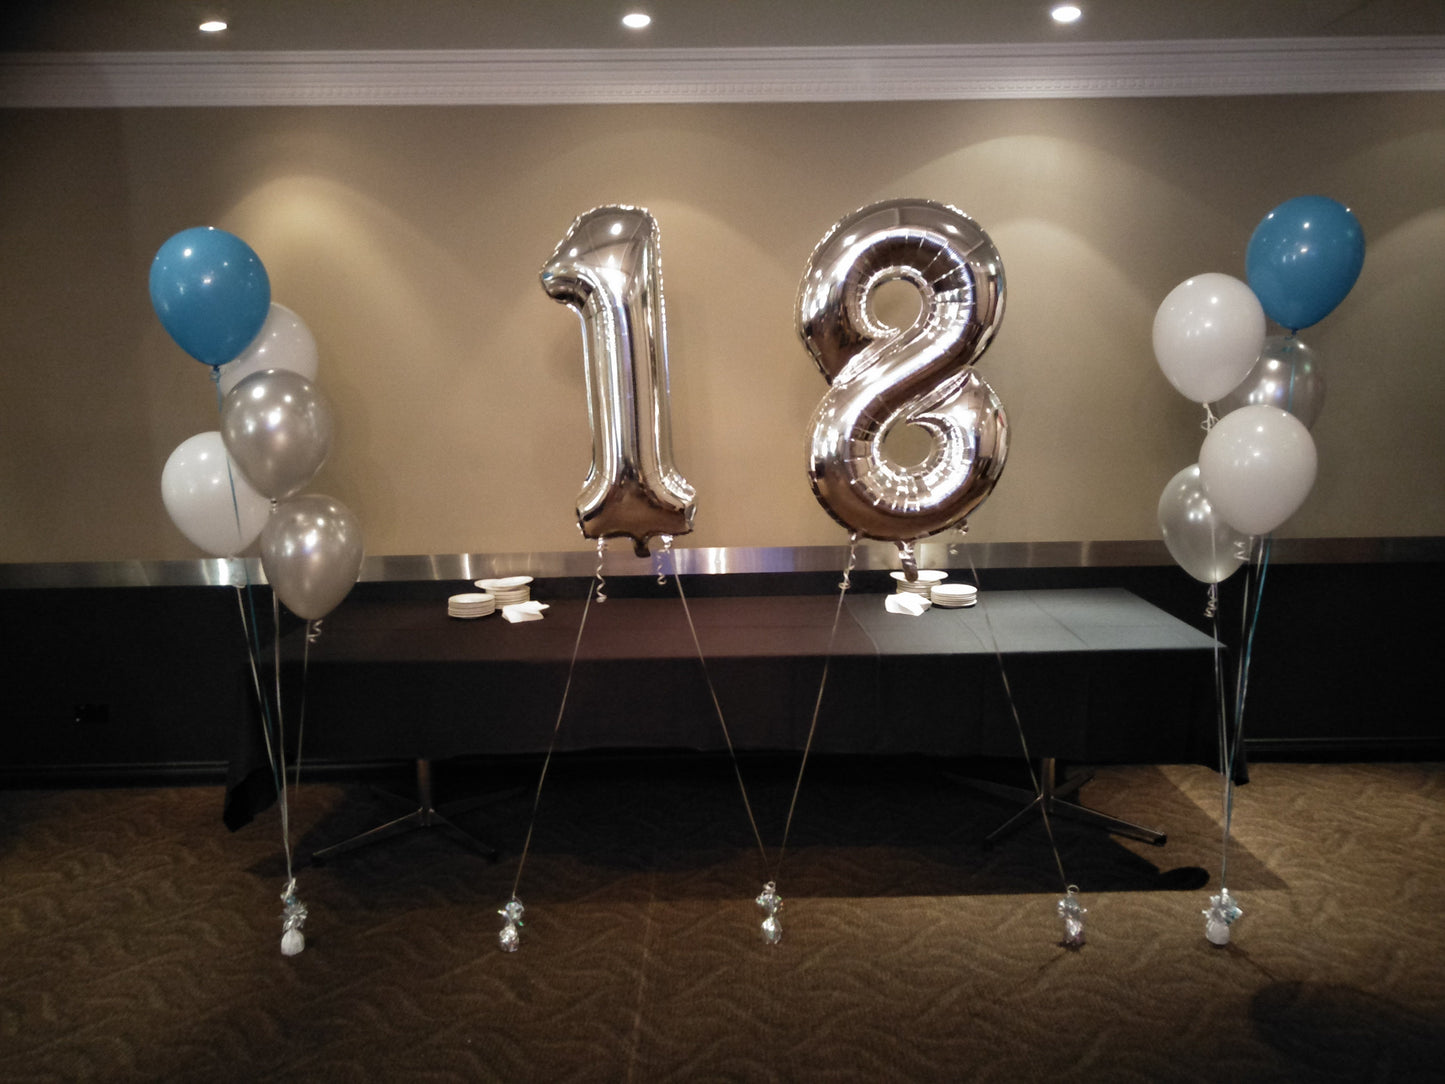 86cm Megaloon Numbers with 2 Bunch of 5 Helium Balloons Bouquet